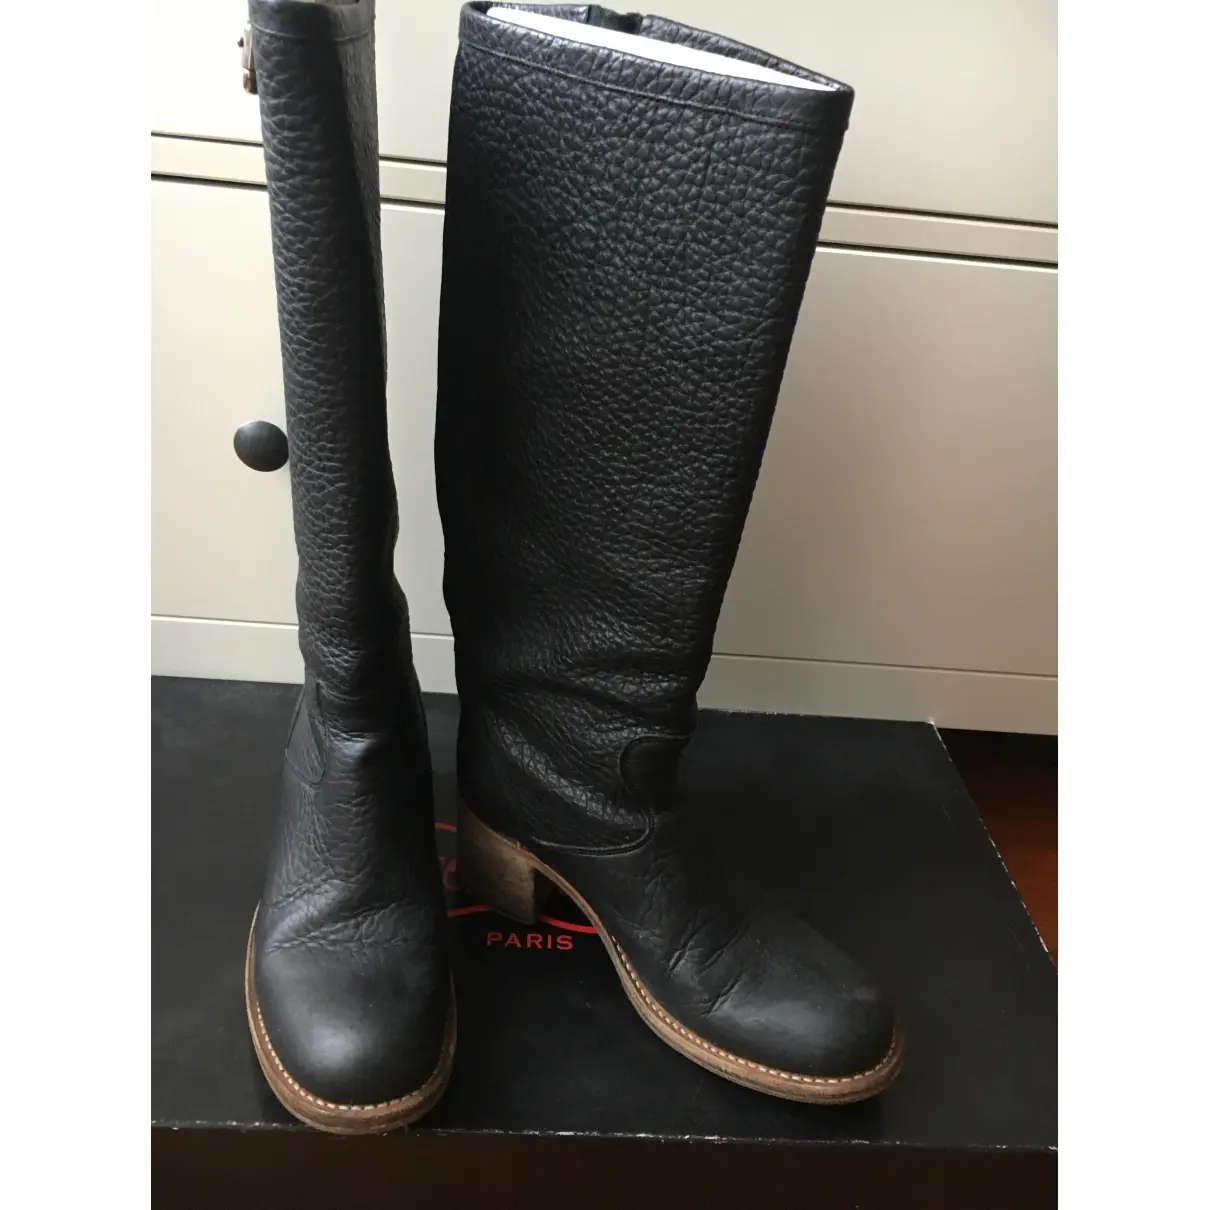 Free Lance Geronimo leather biker boots for sale